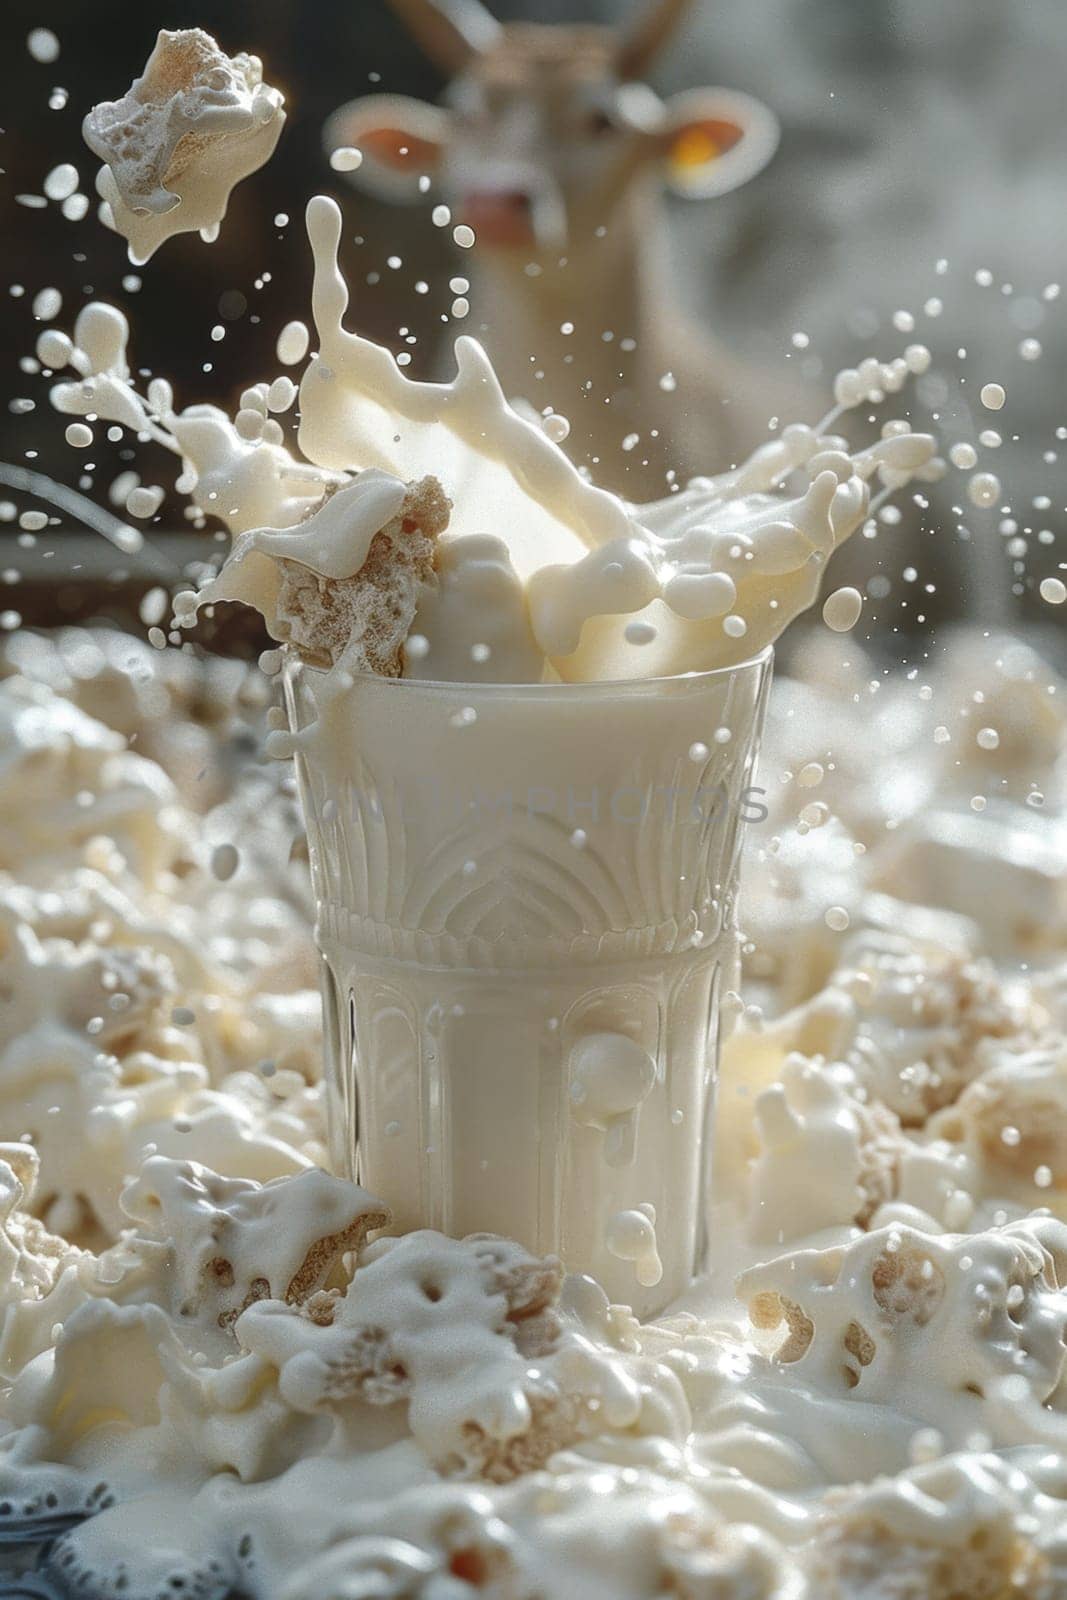 A glass of milk with splashes . World Milk Day by Lobachad